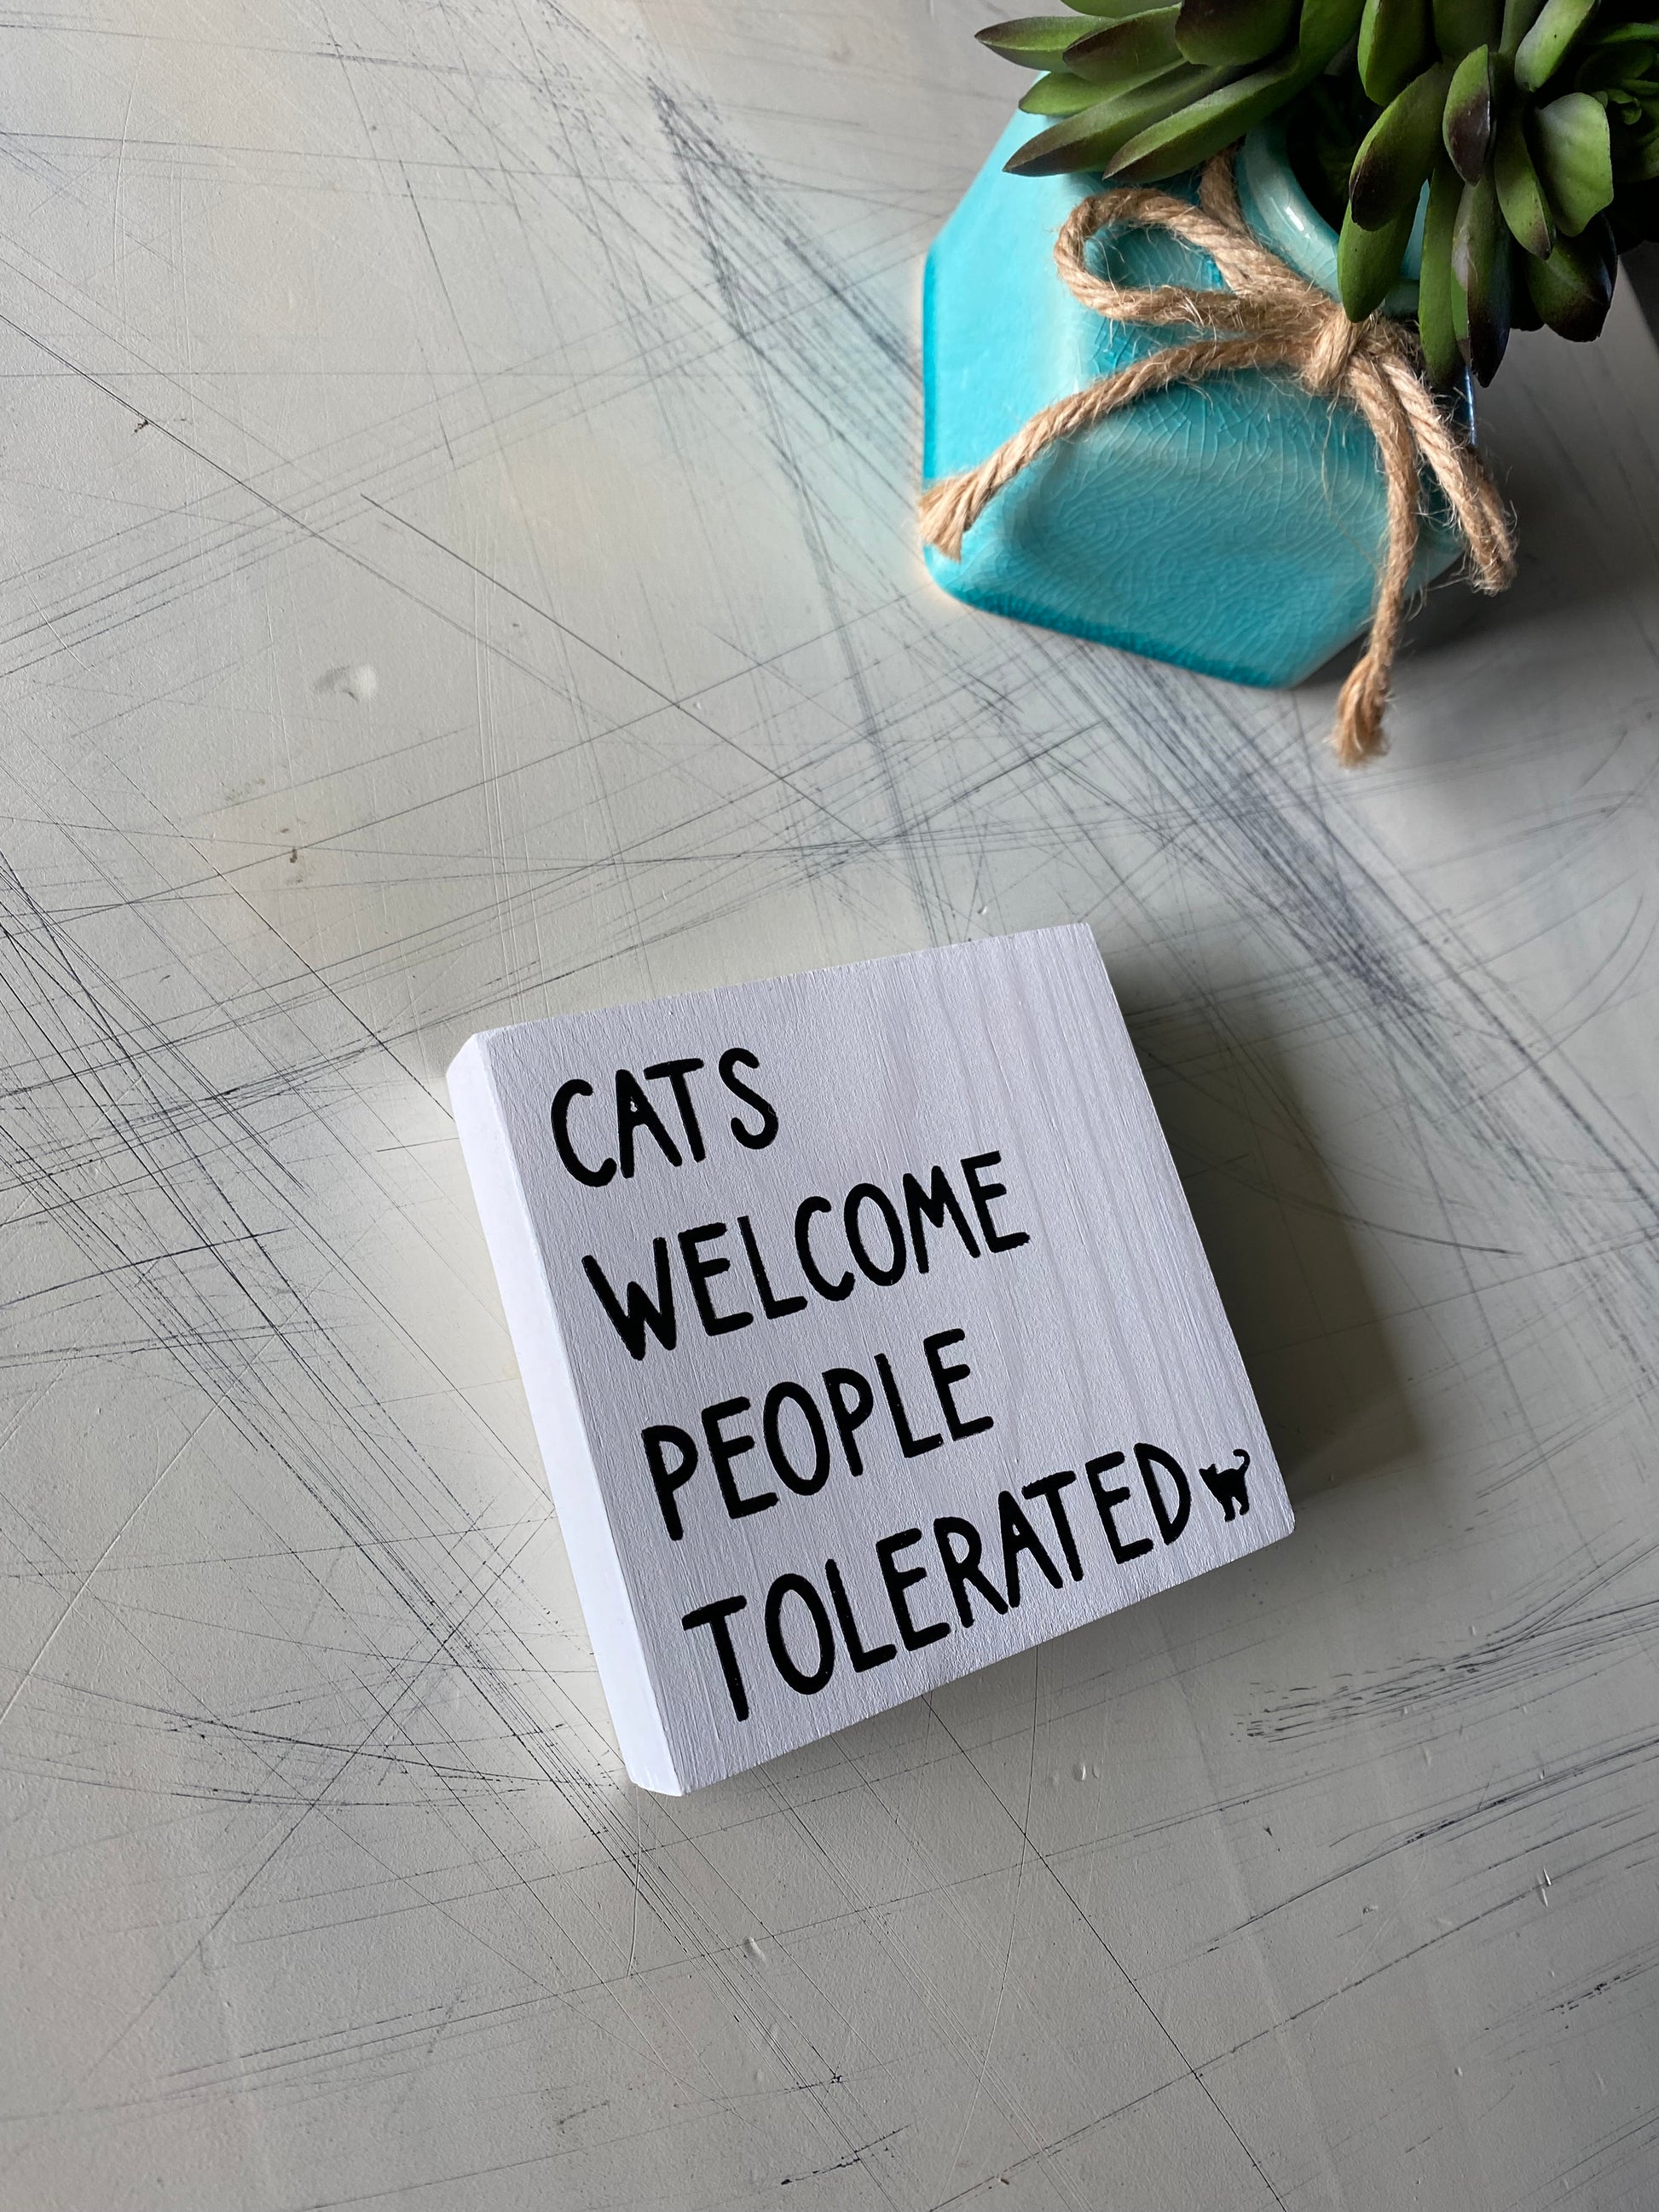 Cats welcome, people tolerated - handmade mini wood sign